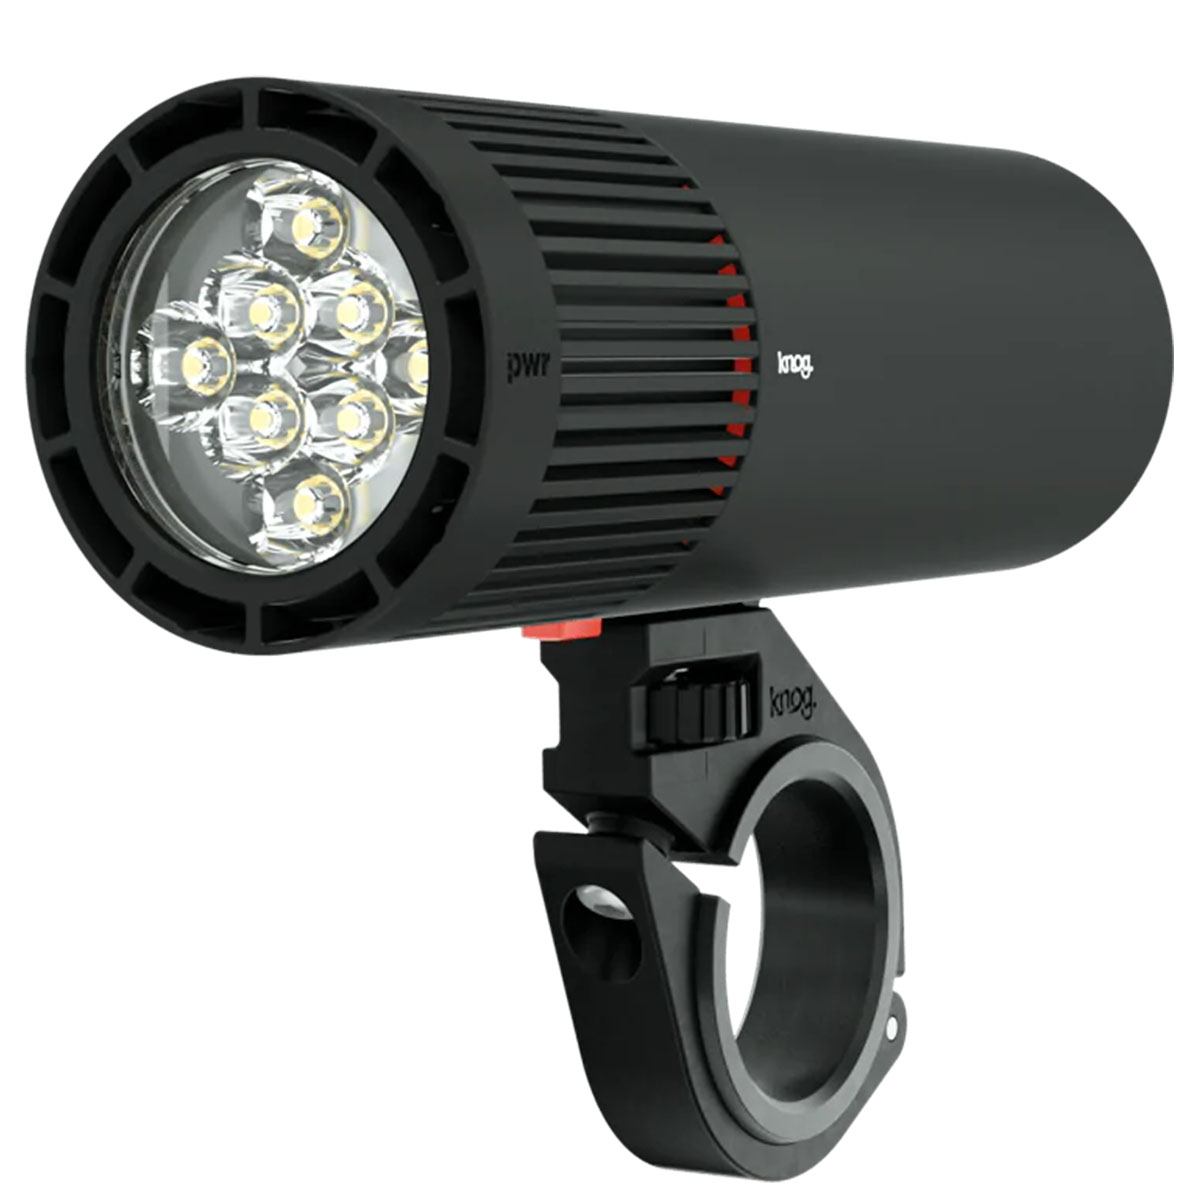 PWR Mountain 2000 Front Light